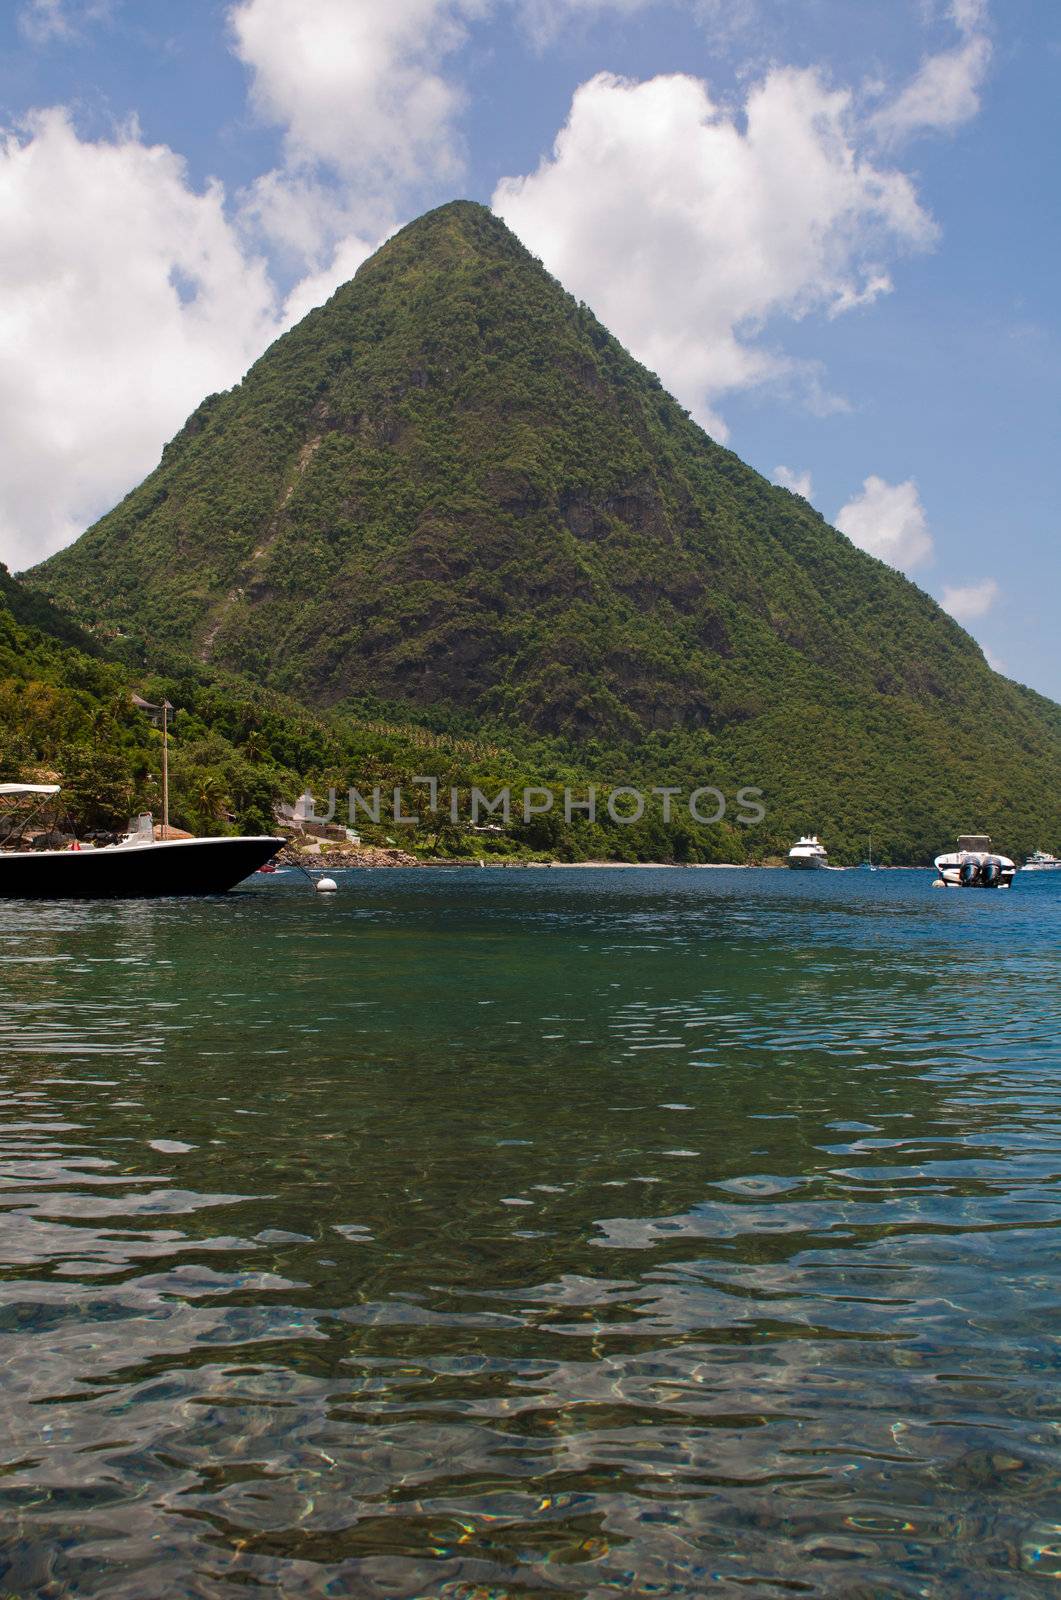 The Pitons in Saint Lucia by luissantos84